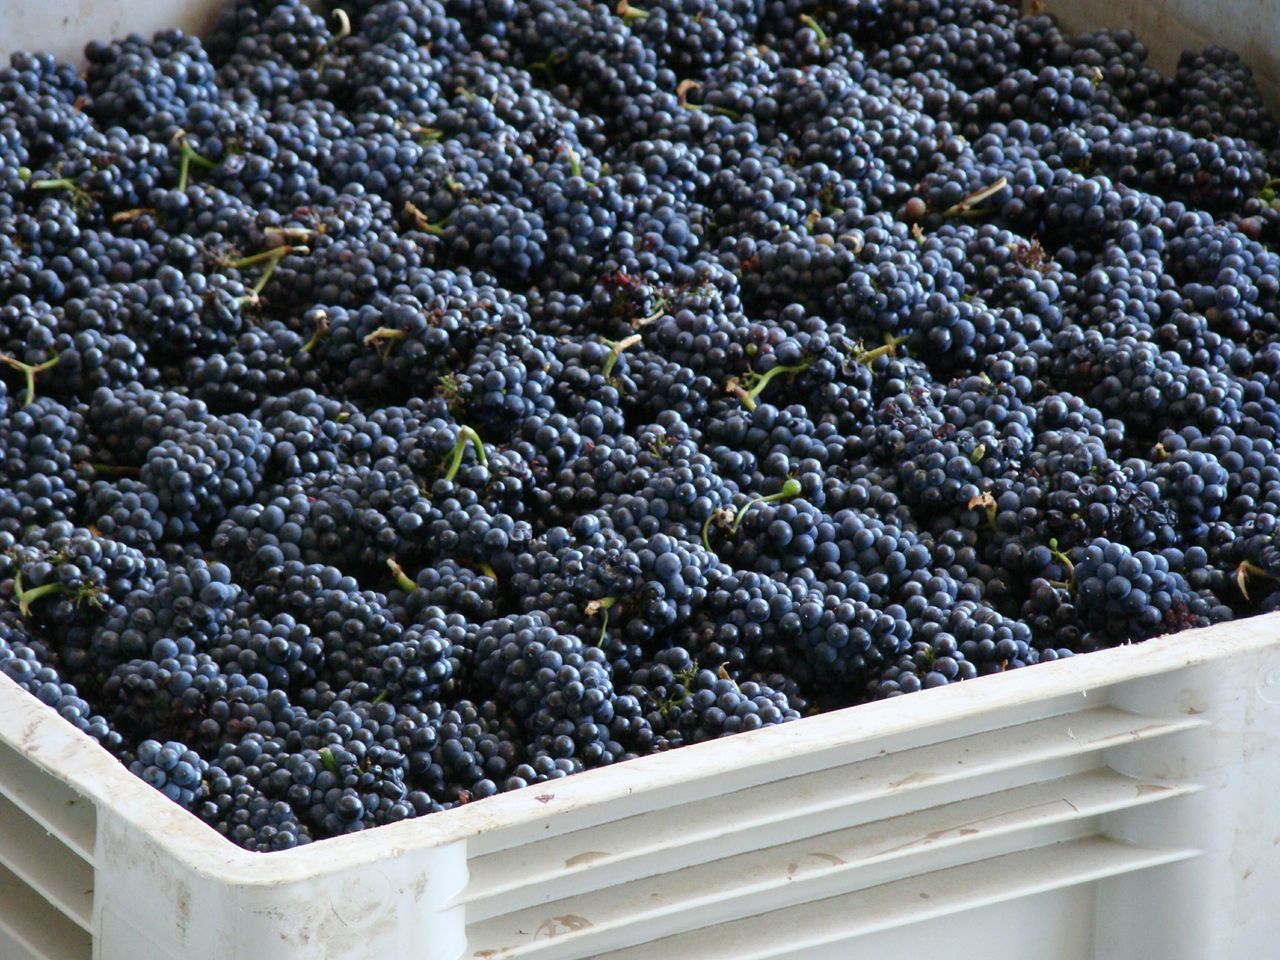 Grapes in a bin ready to be crushed at Rack & Riddle.jpg